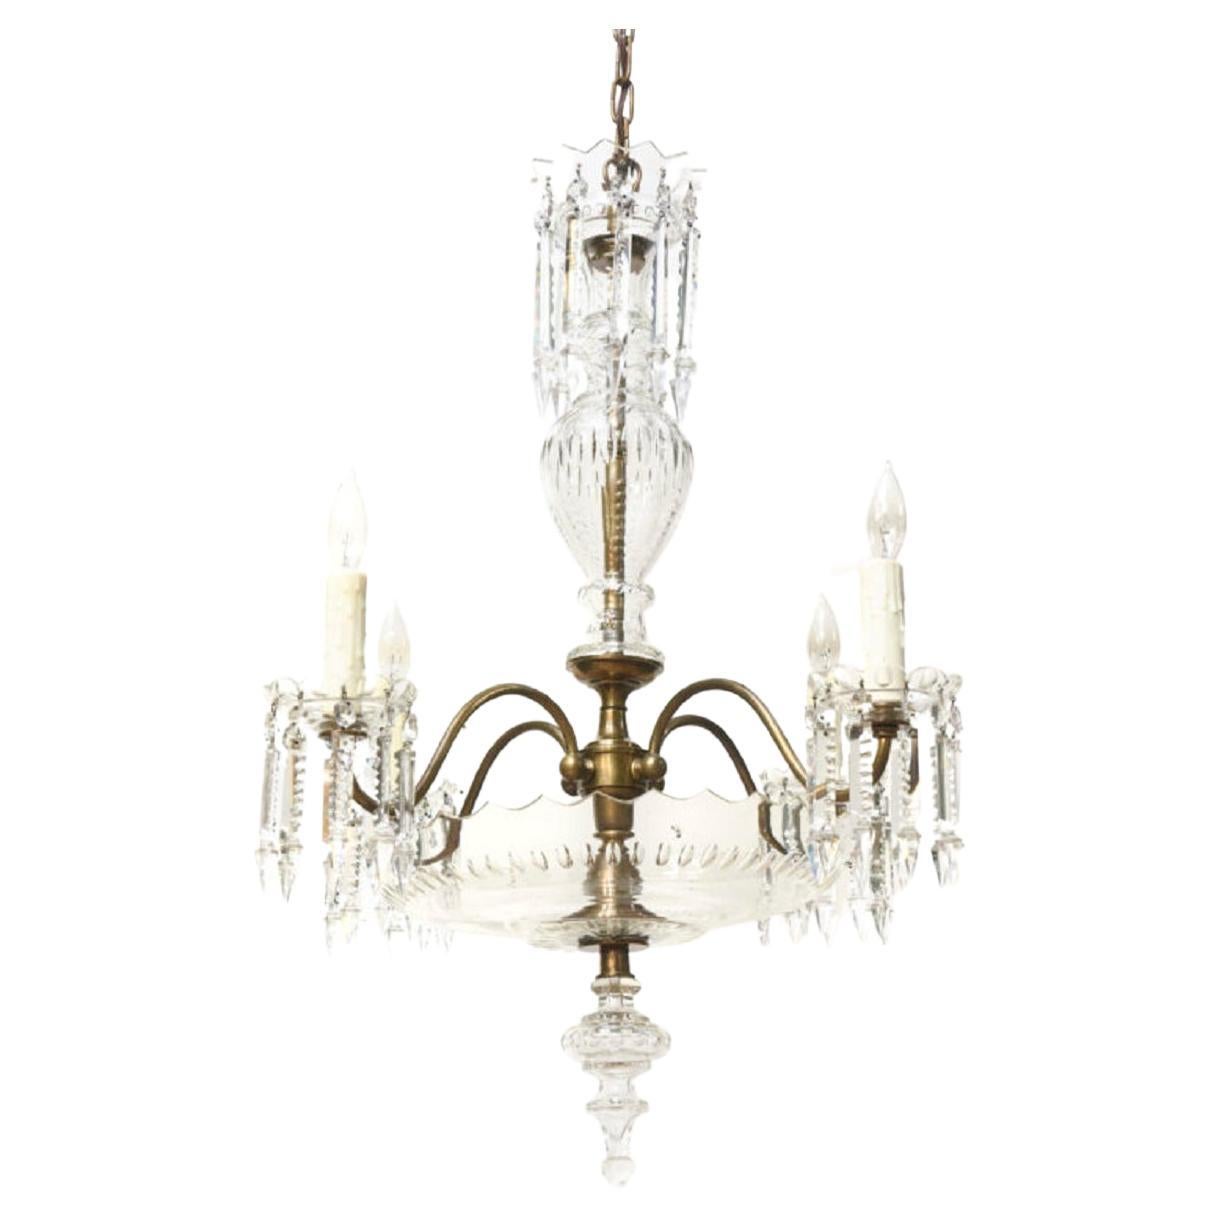 Are crystal chandeliers still in style?